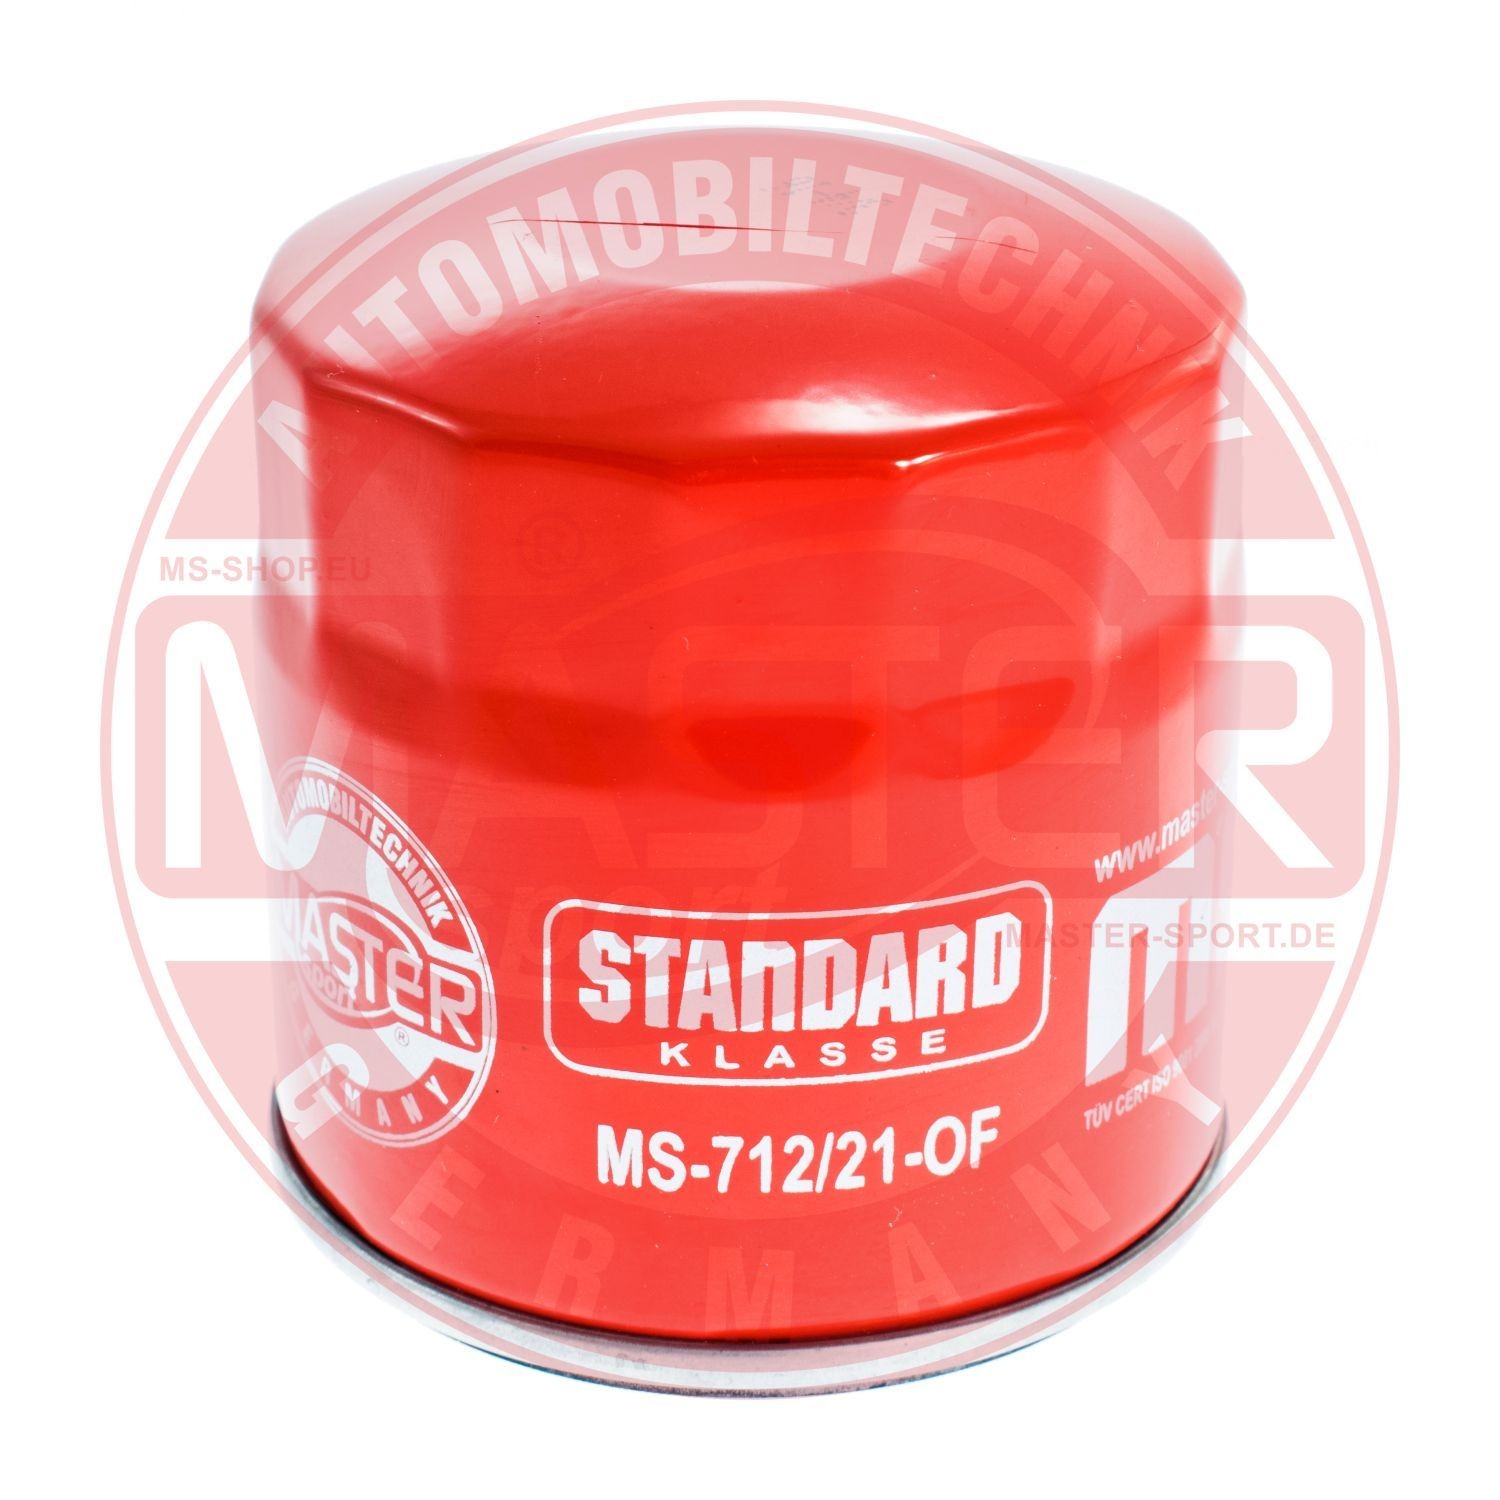 MASTER-SPORT 712/21-OF-PCS-MS Oil filter 3/4-16 UNF, with one anti-return valve, Filter Insert